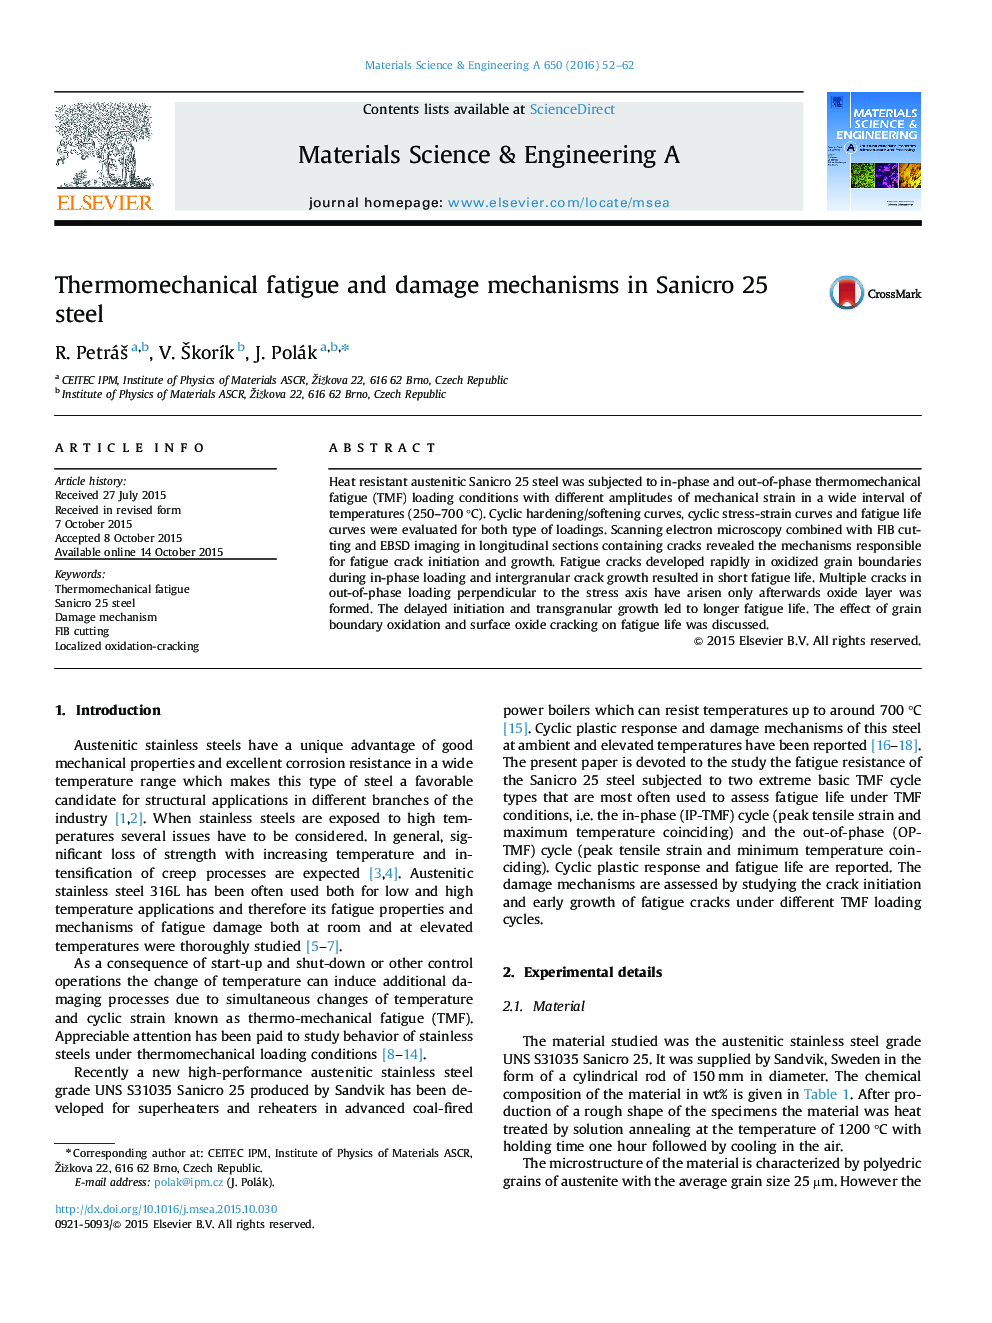 Thermomechanical fatigue and damage mechanisms in Sanicro 25 steel